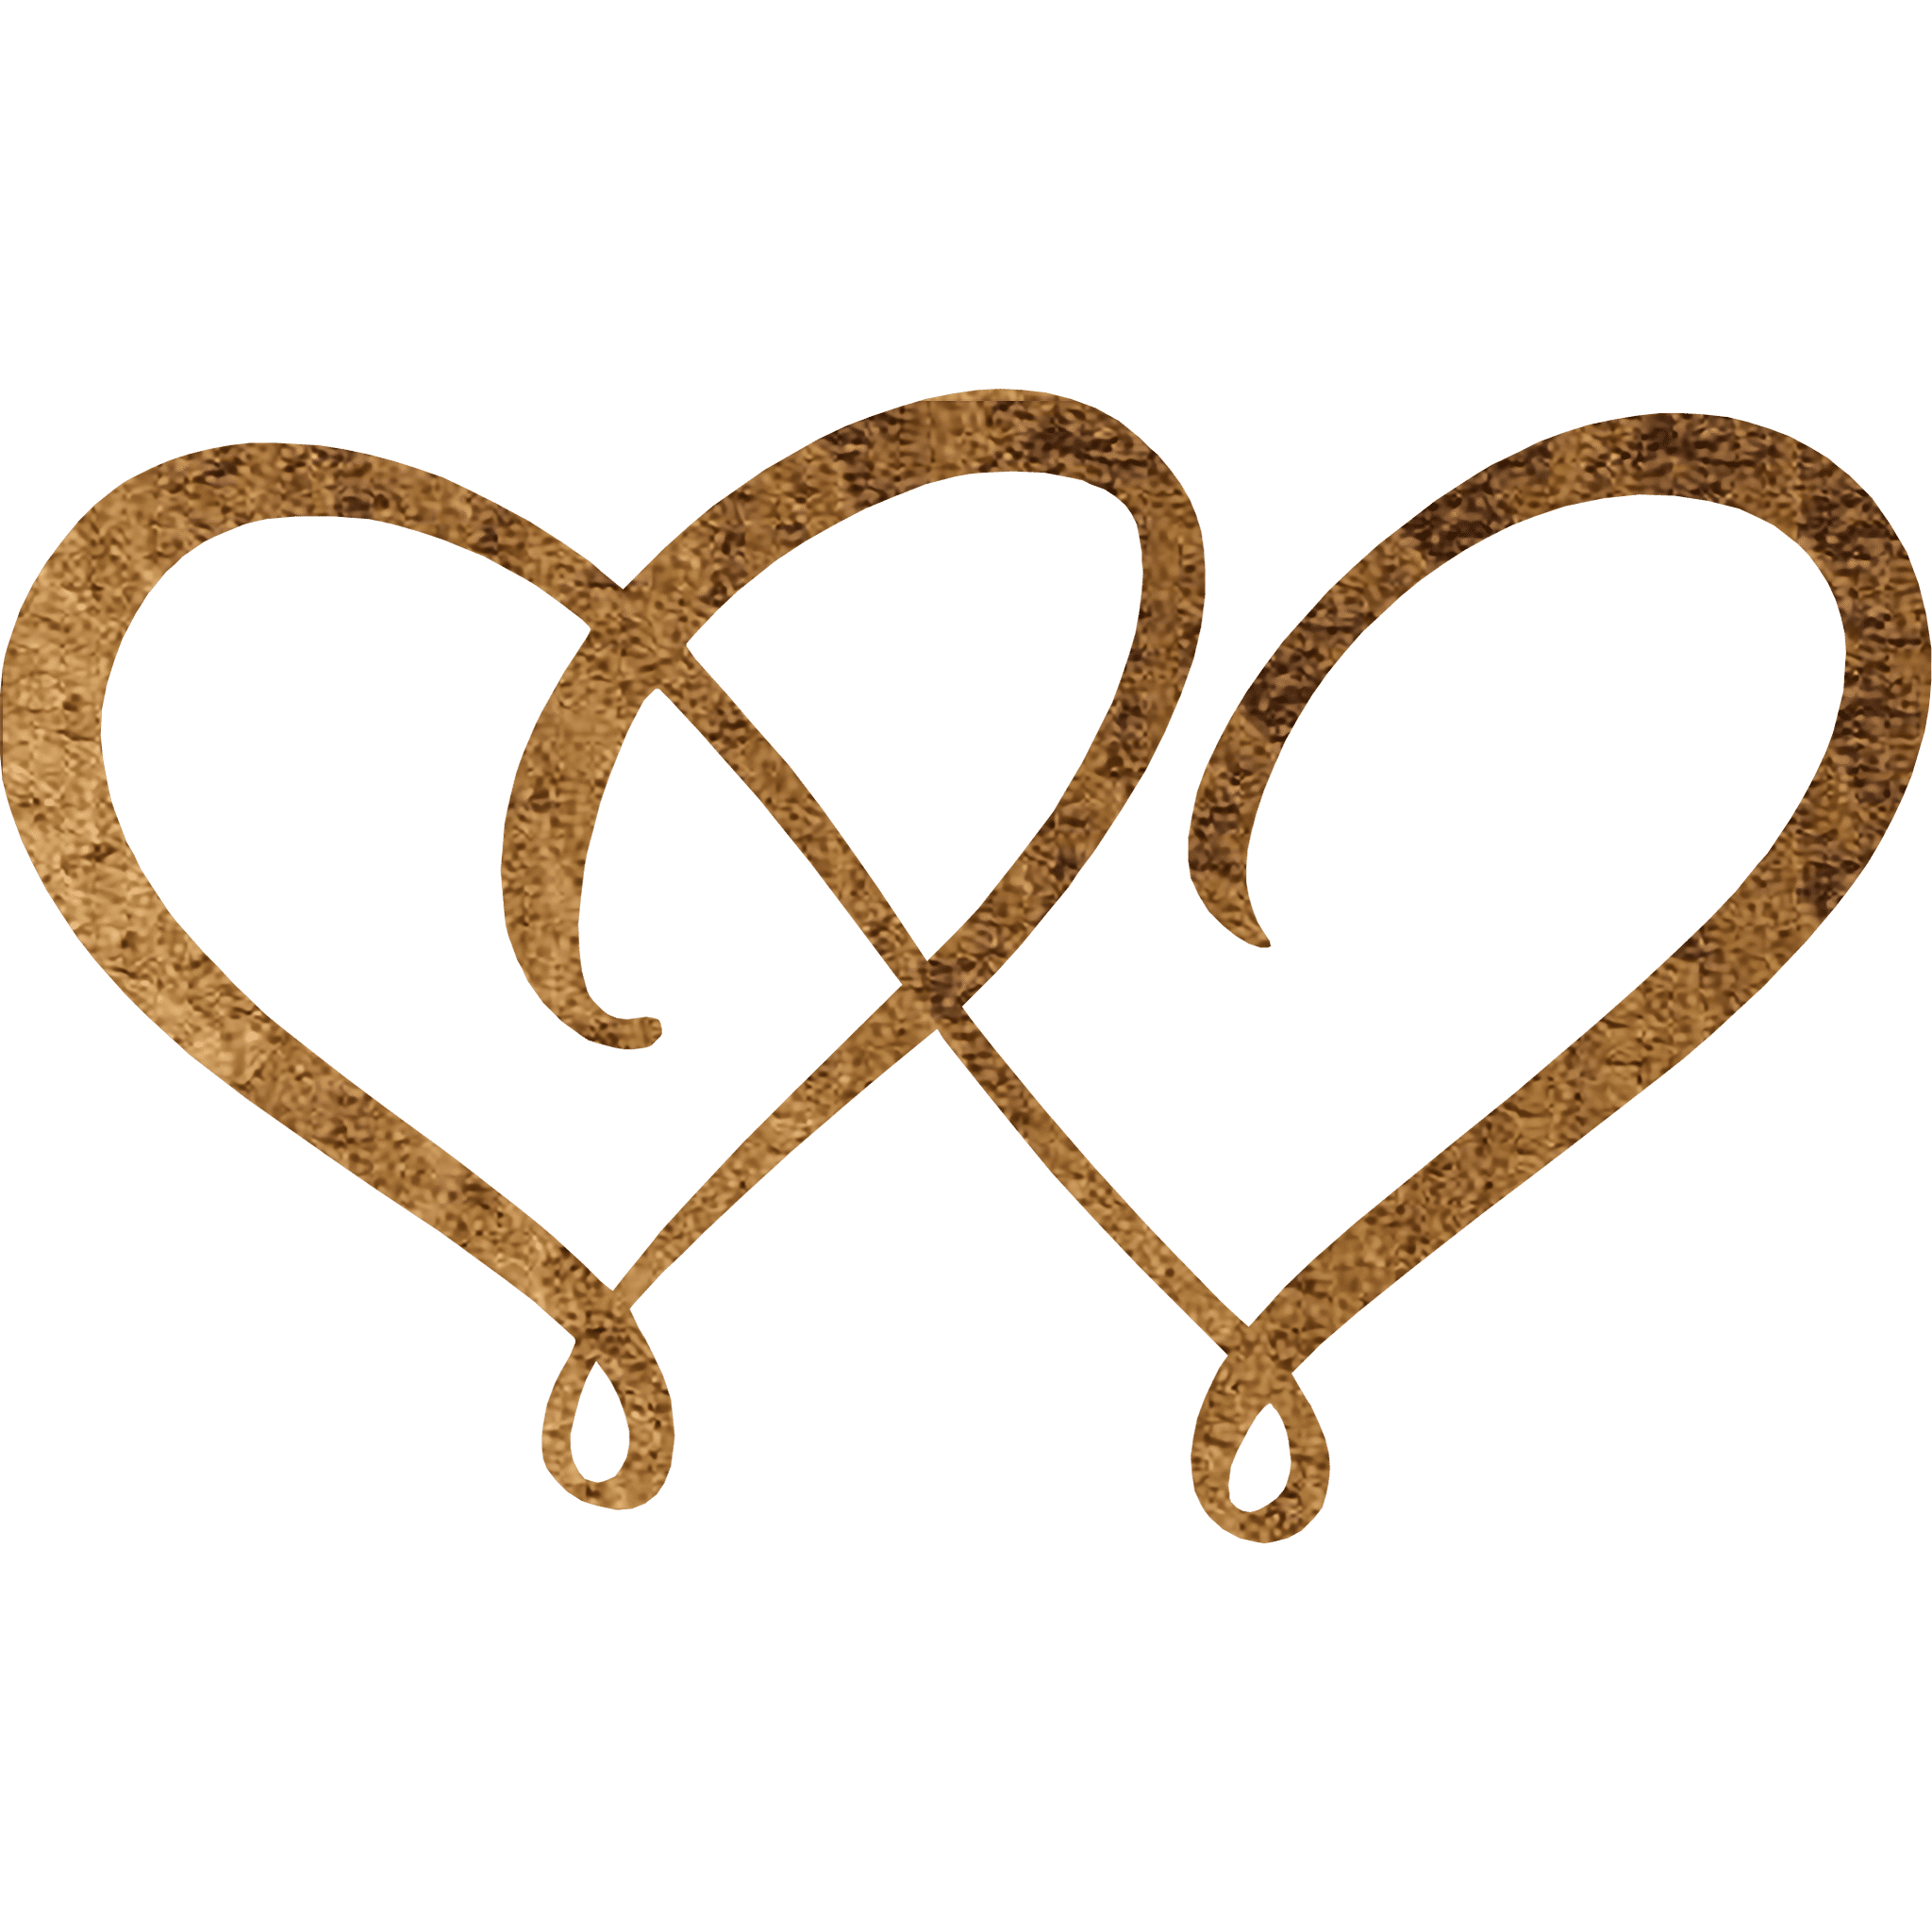 Hearts within Heart Wall Metal Art with Rustic Copper Finish Hanging 